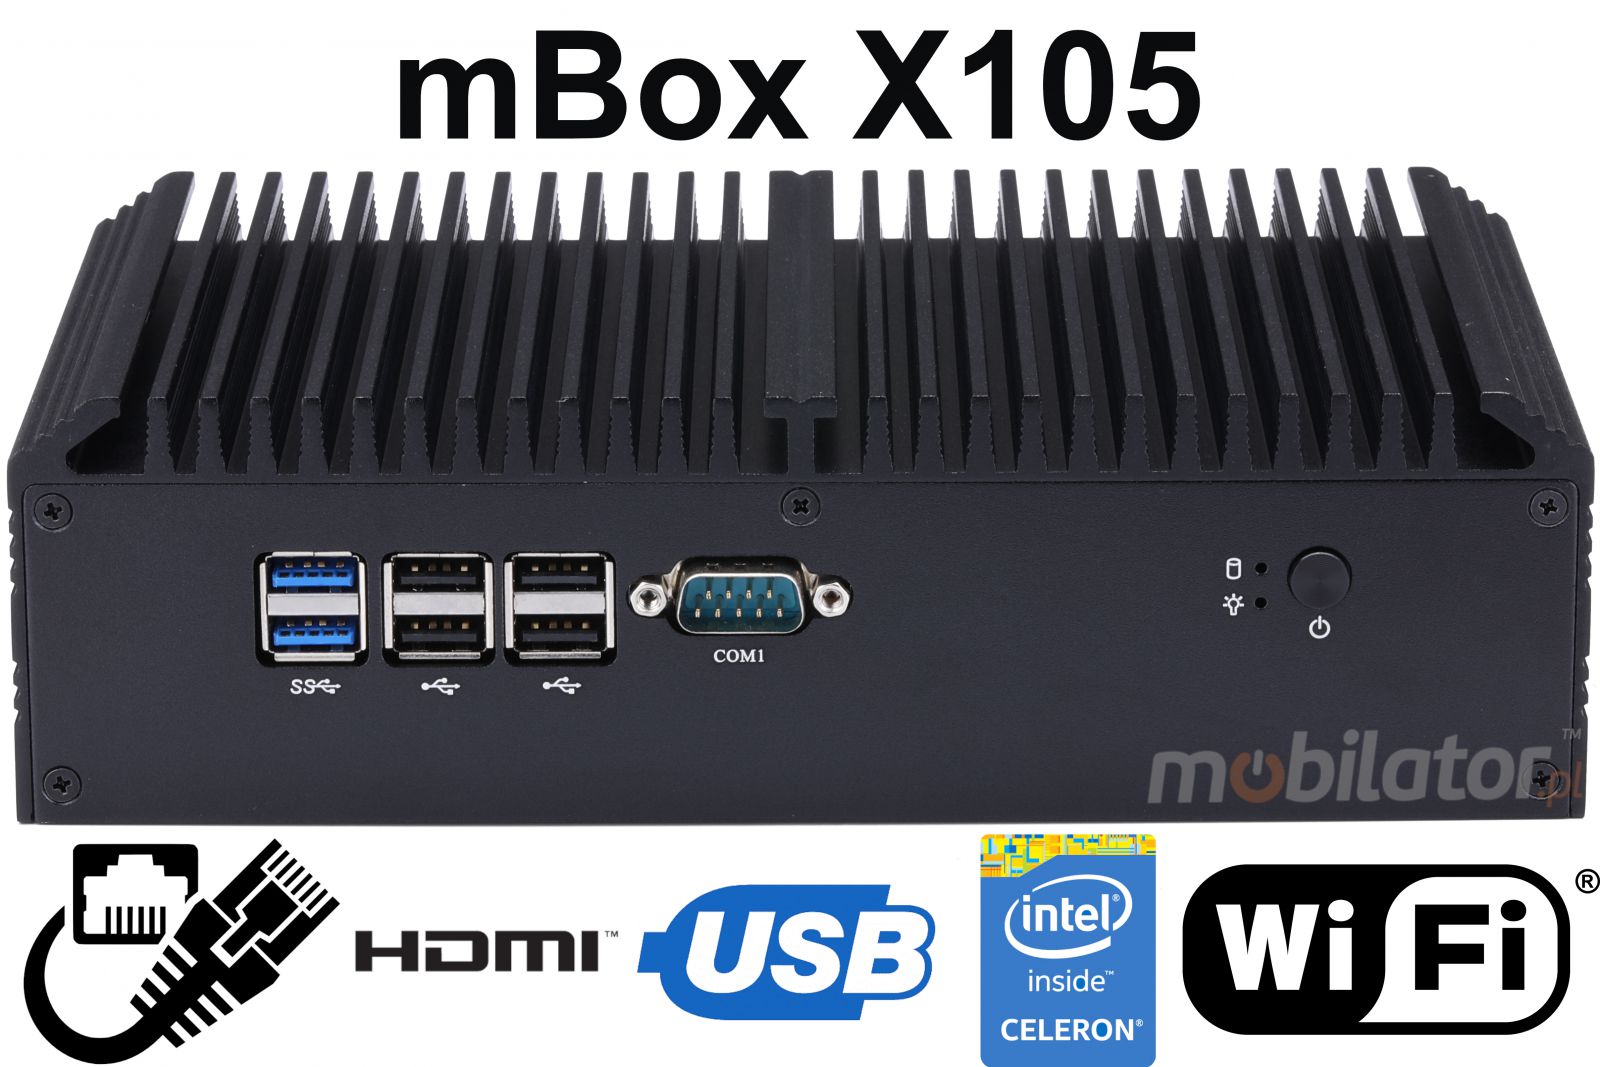 mBox X105 v.5 - Industrial Mini Computer with 500GB HDD disk with Wifi and Bluetooth, 4 USB 3.0 ports, 6x RS-232 - Title image